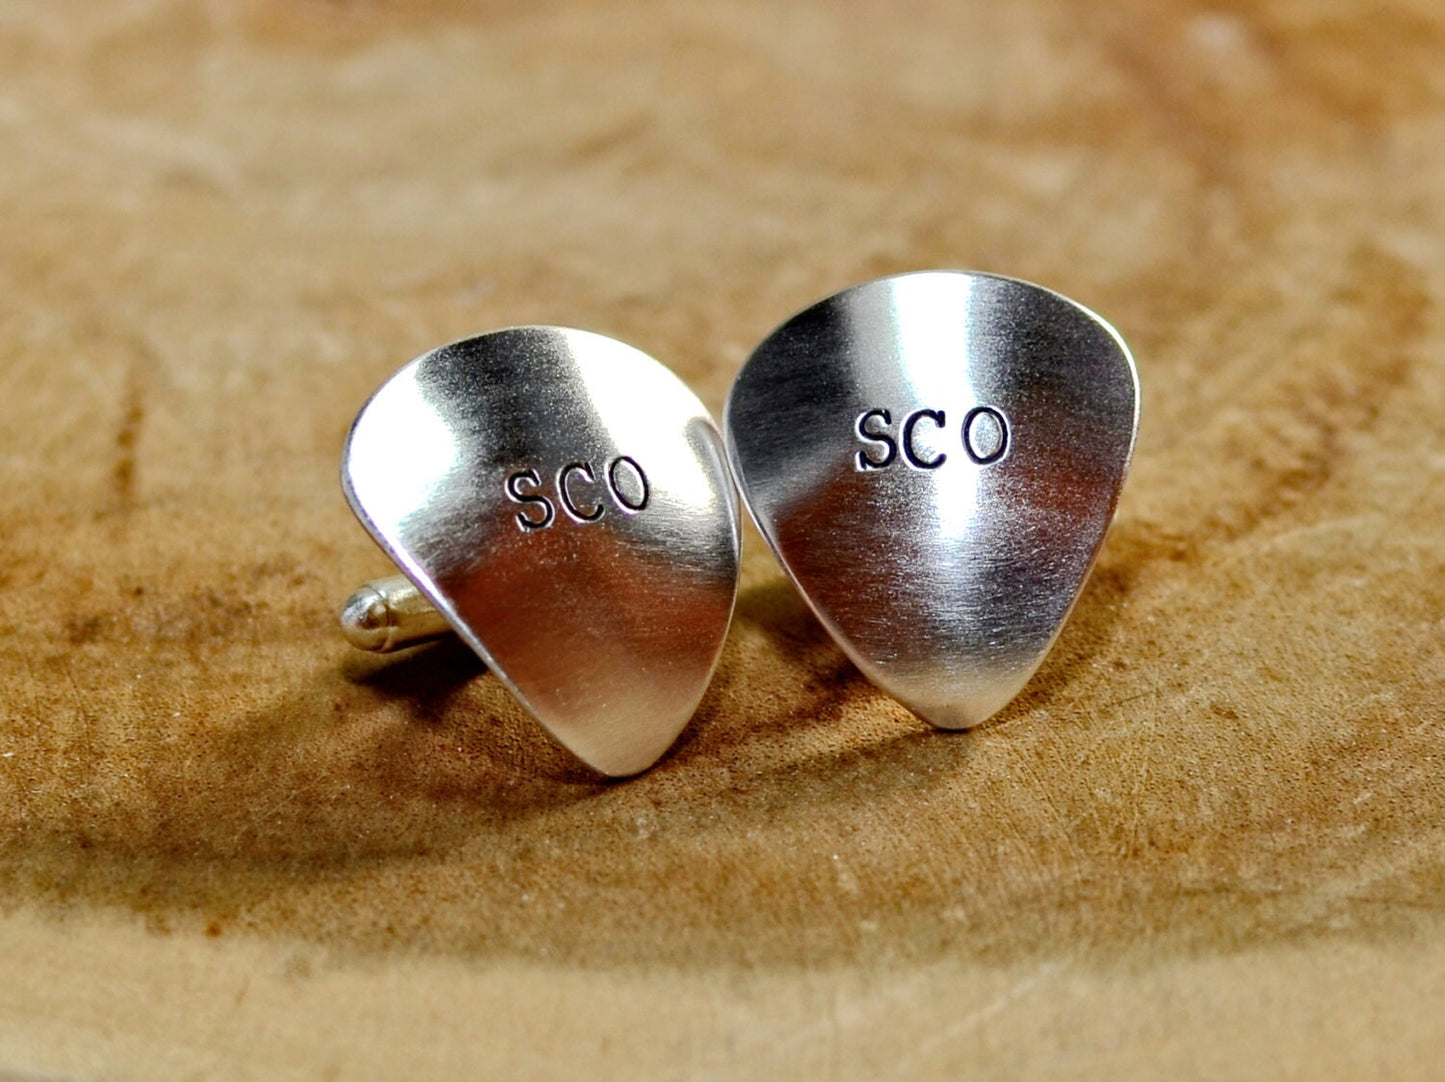 Personalized sterling silver guitar pick cuff links with initials or monogram